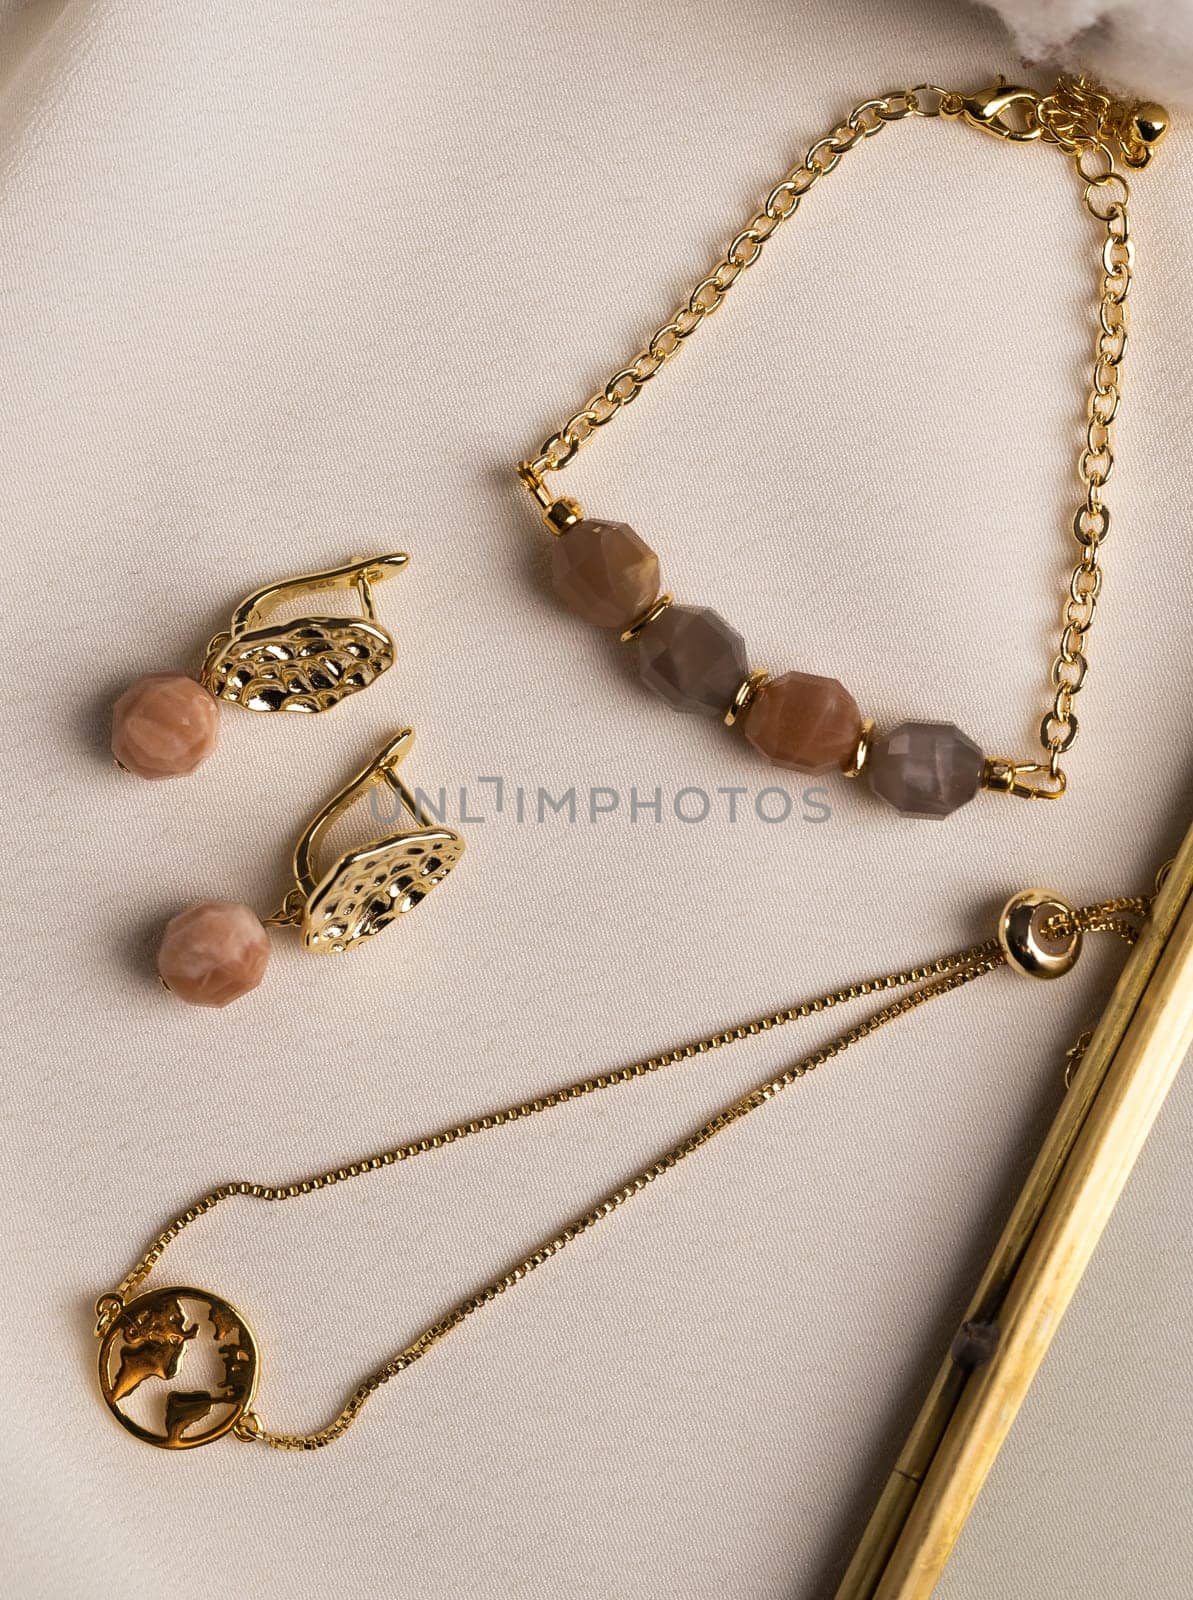 Bracelets made of natural stones. natural mineral texture of the necklace. The background is blurred. not everything is in focus.